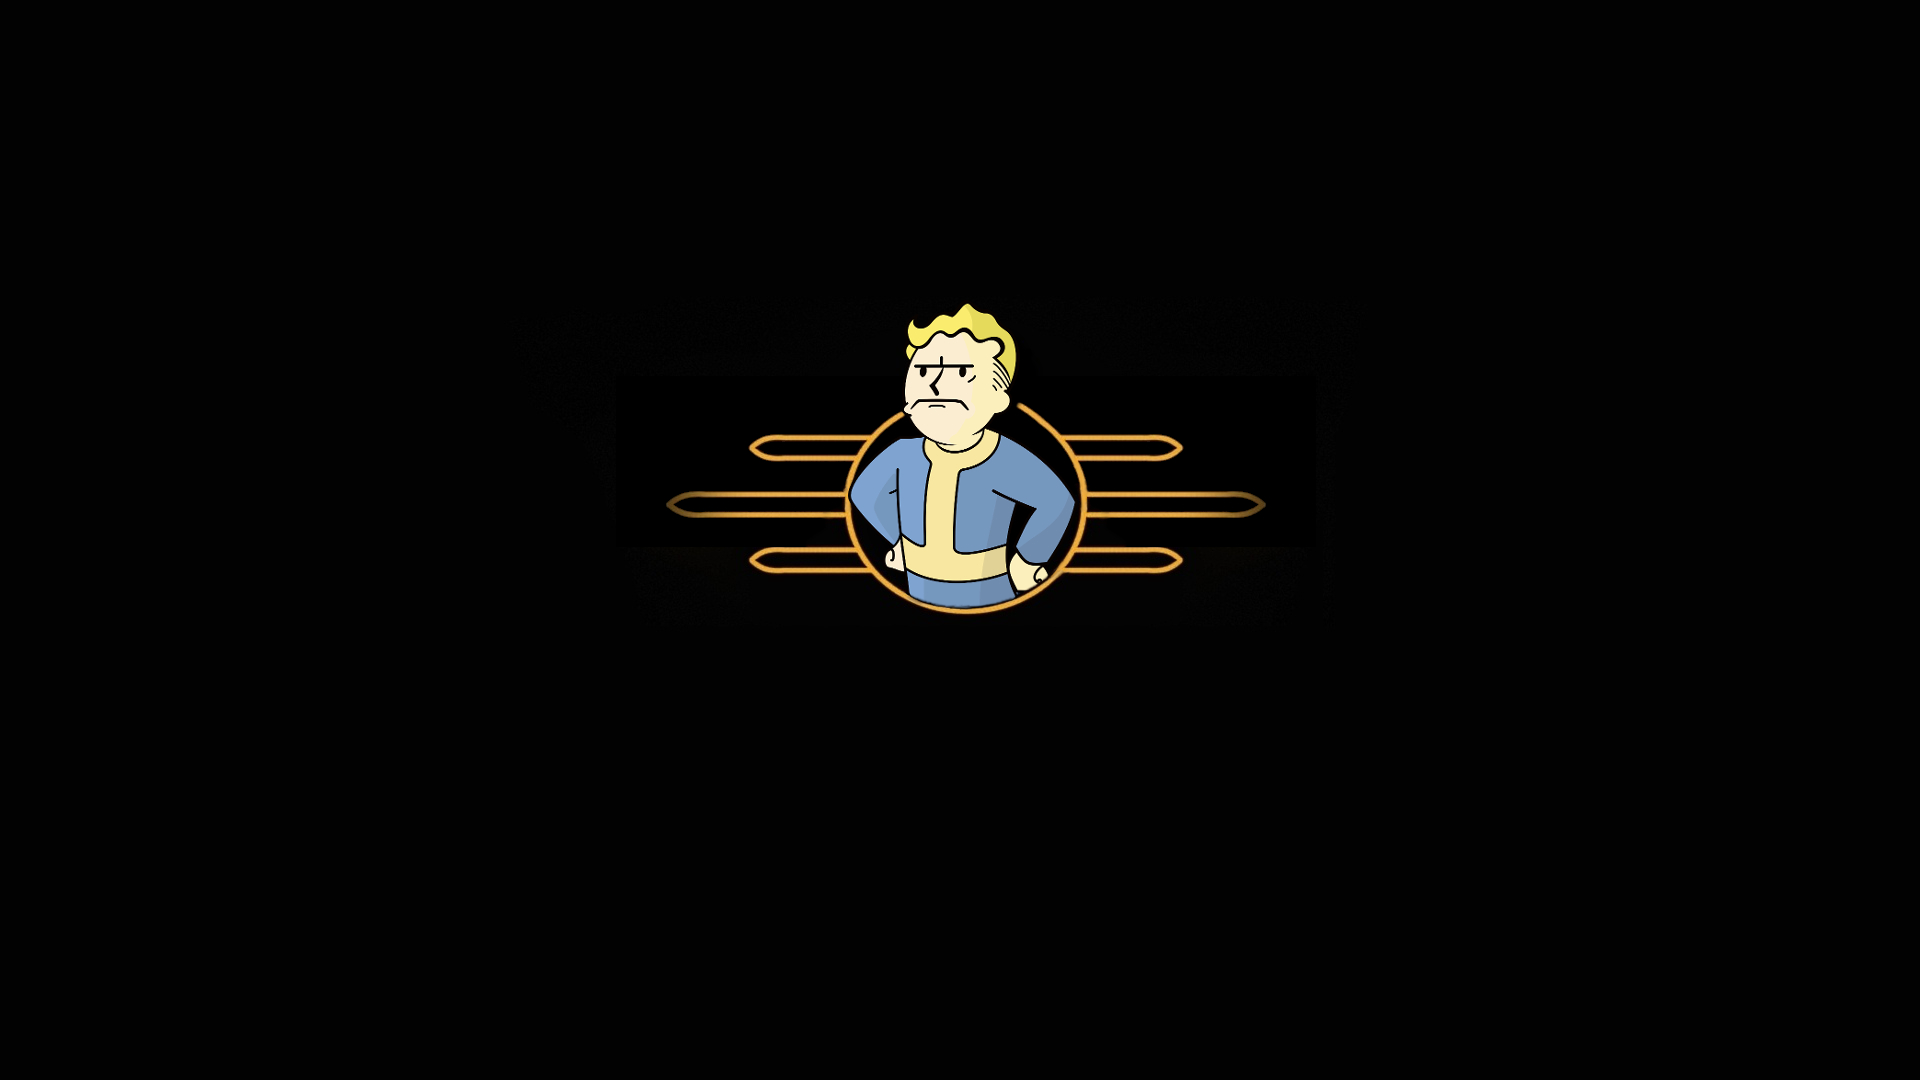 Simple Background Black Background Video Games Pip Boy 1920x1080